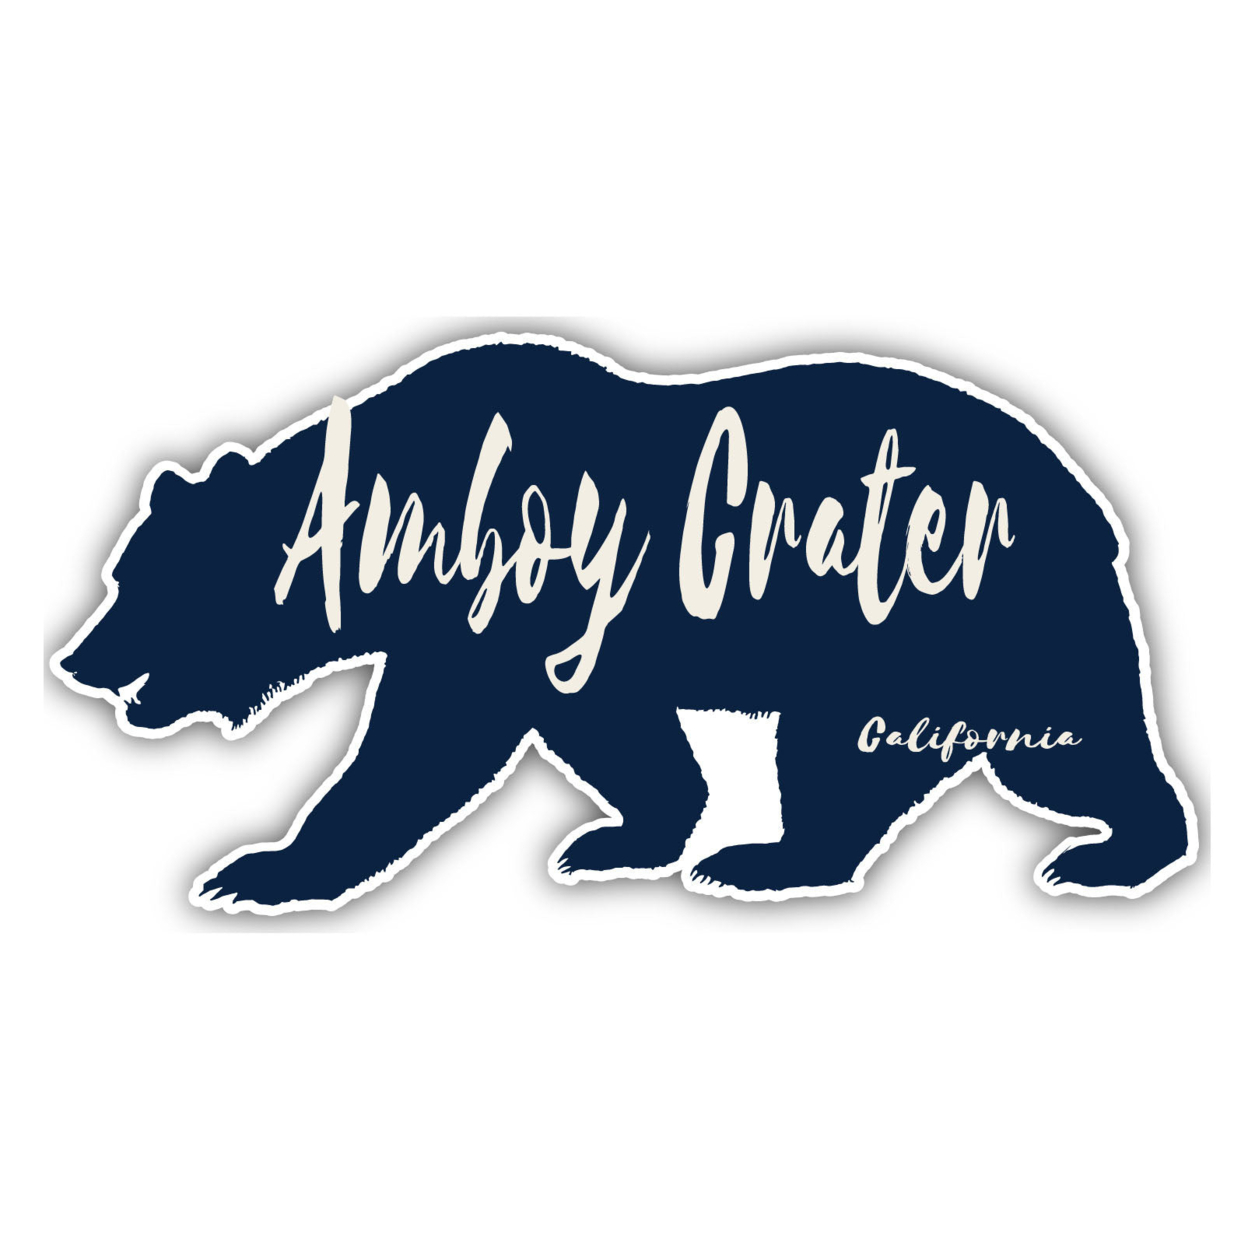 Amboy Crater California Souvenir Decorative Stickers (Choose Theme And Size) - 4-Pack, 12-Inch, Bear